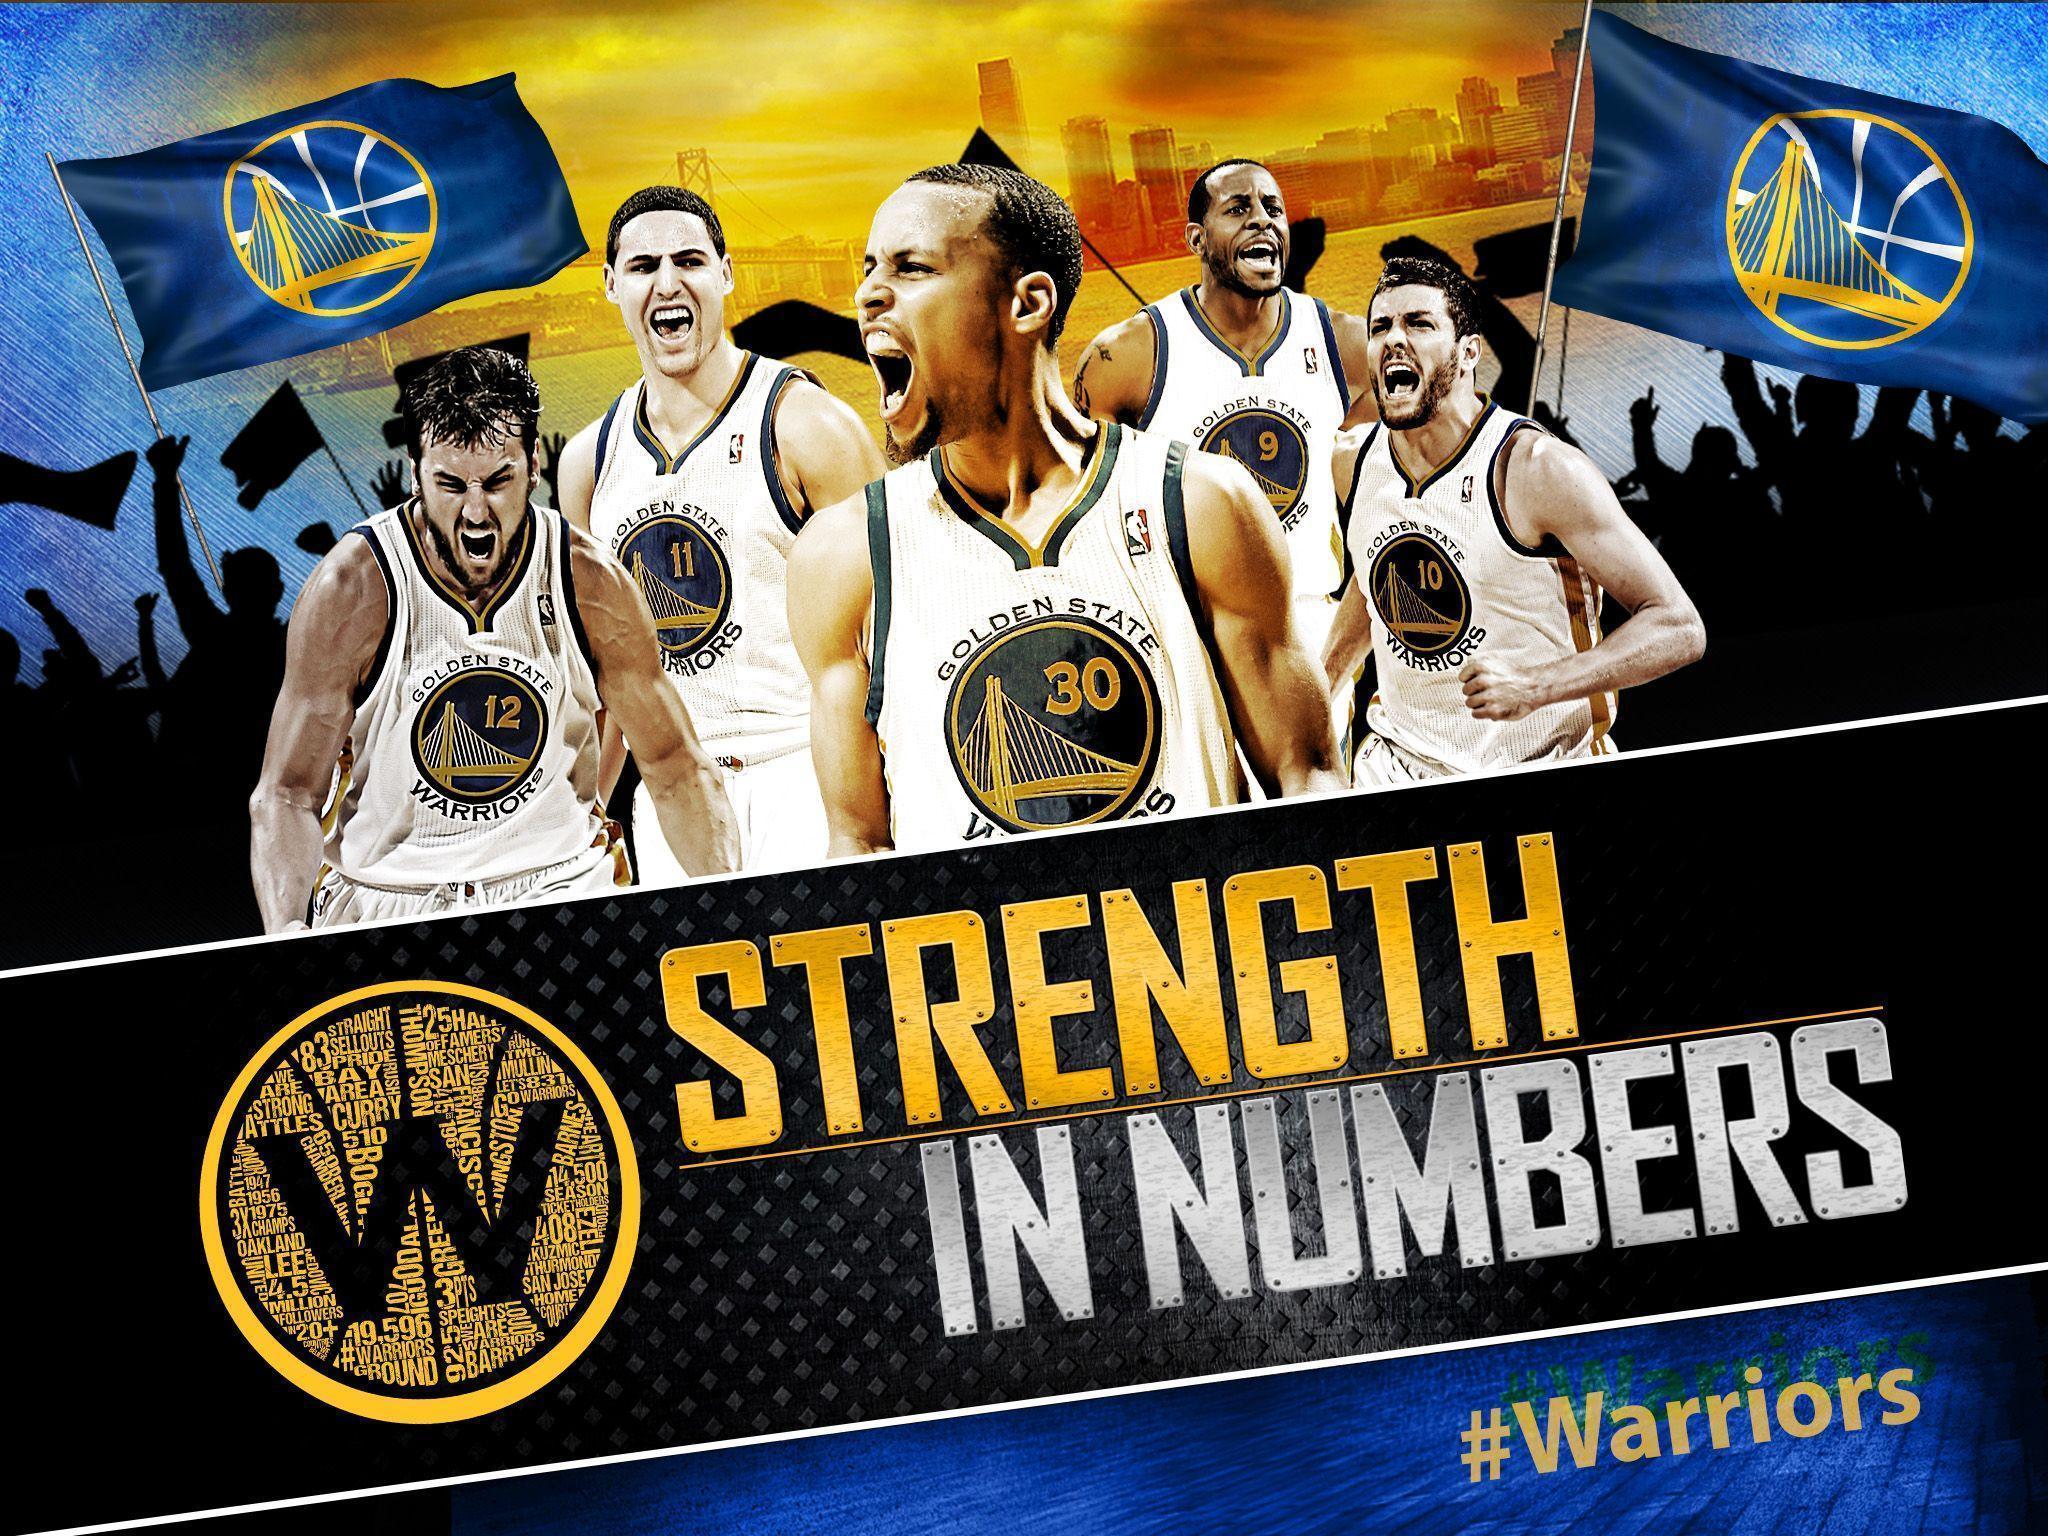 best image about #StrengthInNumbers. Weather